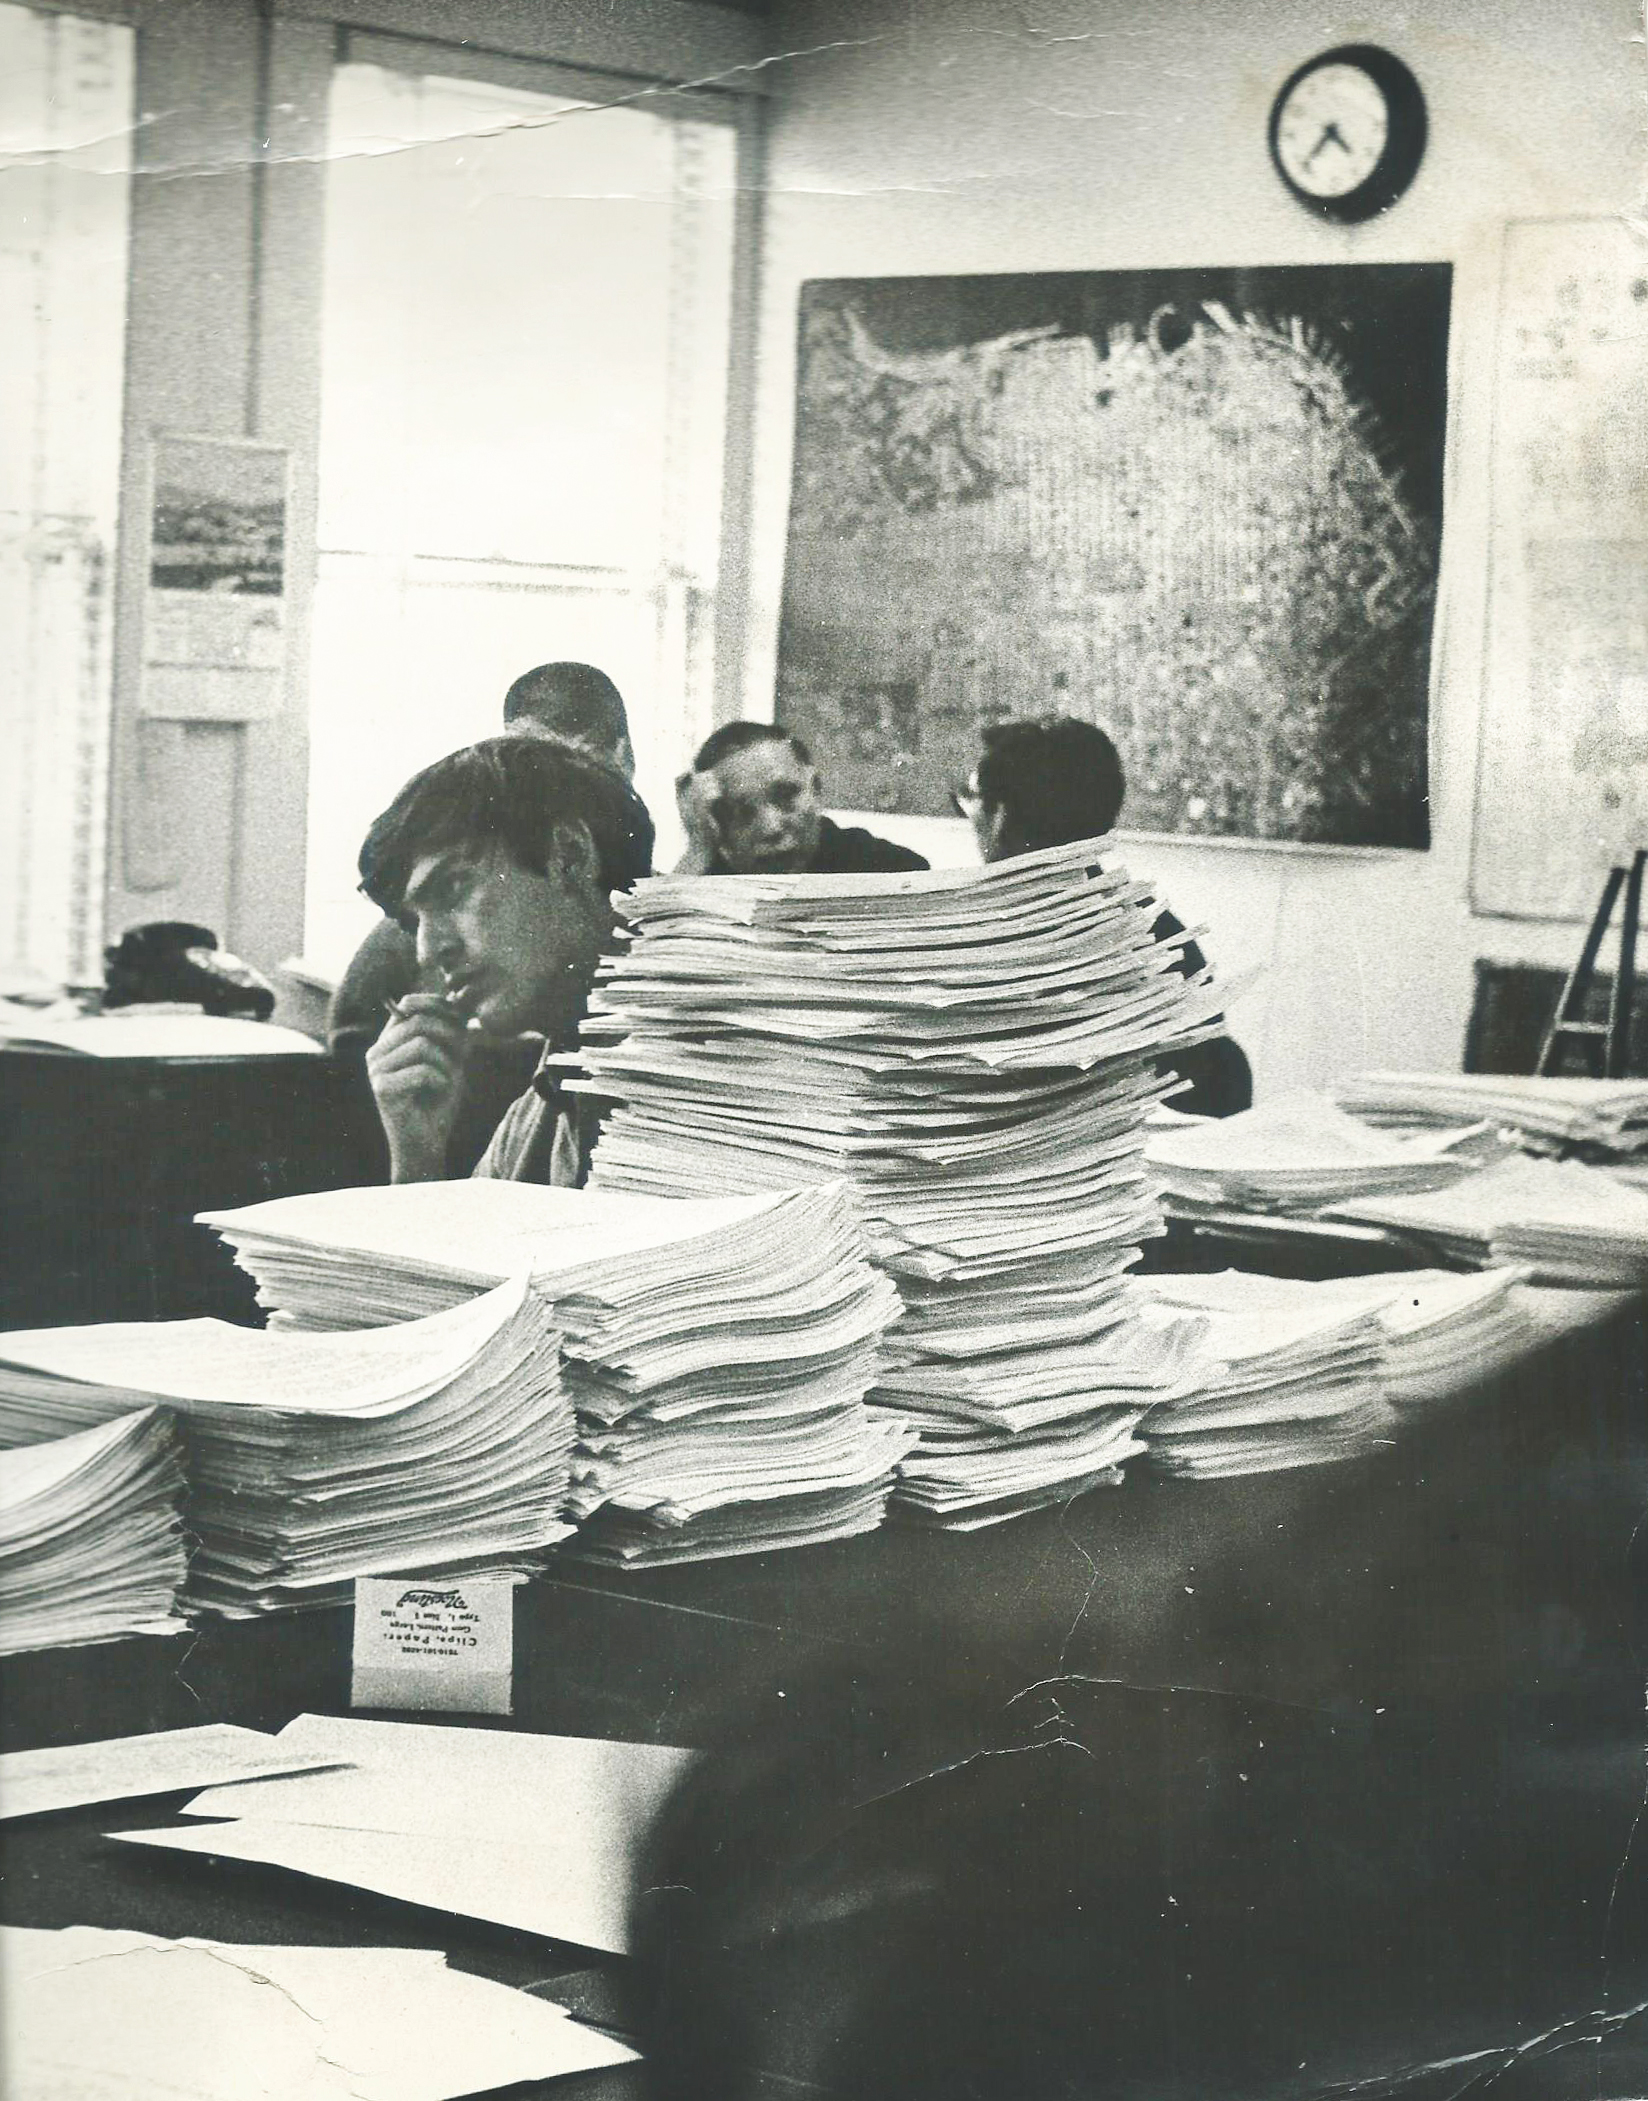 A person sits behind stacks of papers.